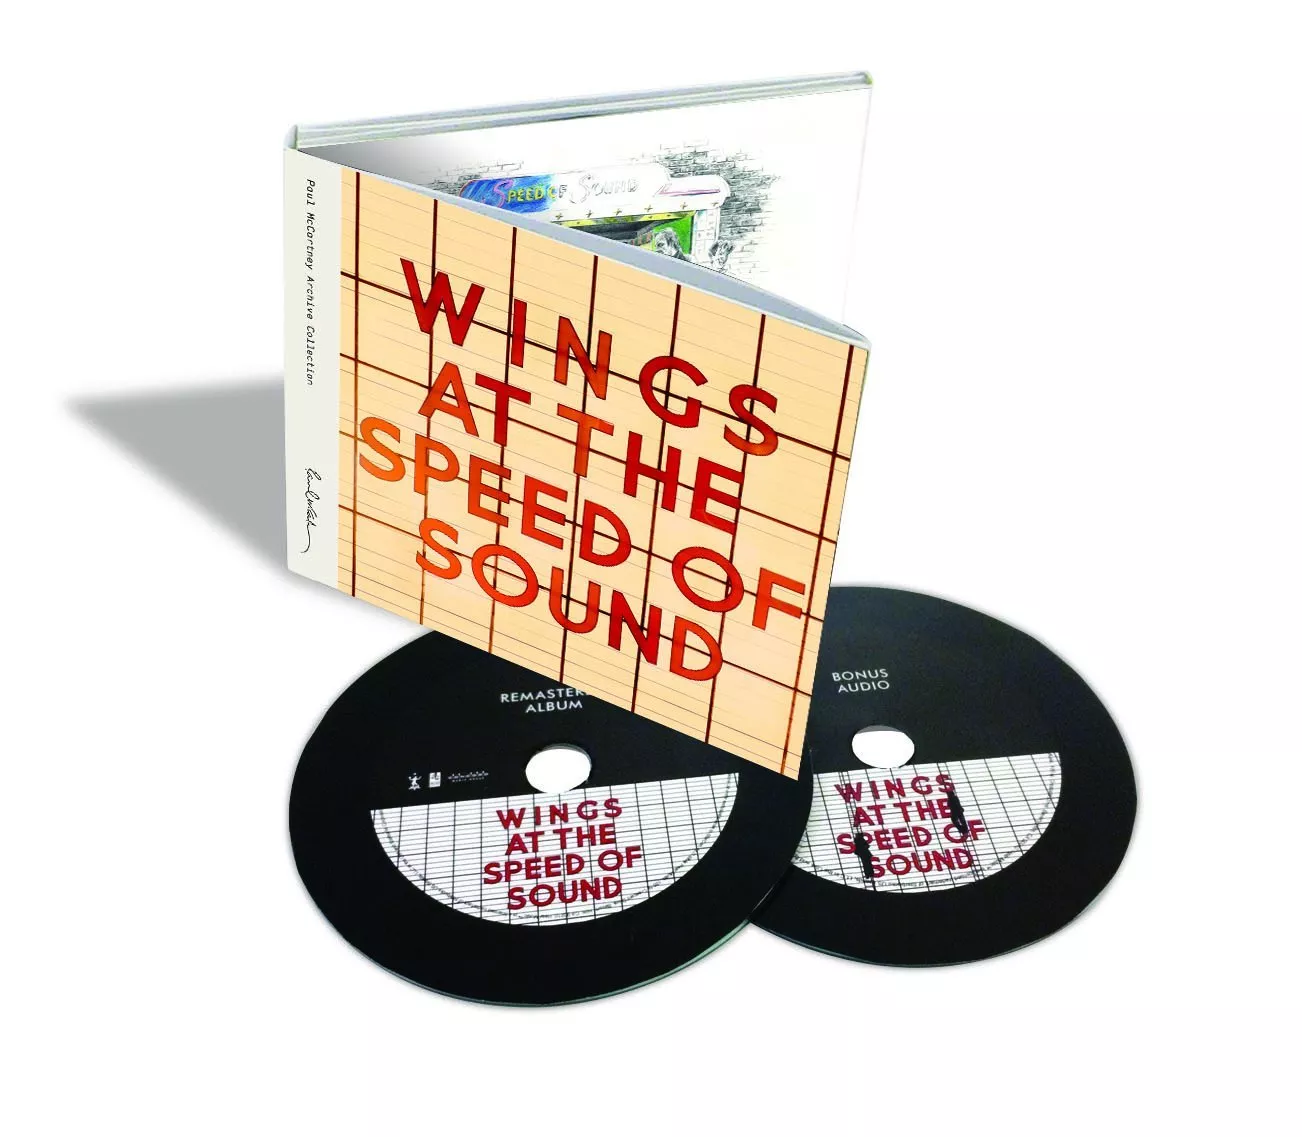 Wings At The Speed of Sound, 2 cd, Paul McCartney Archive Collection - Wings